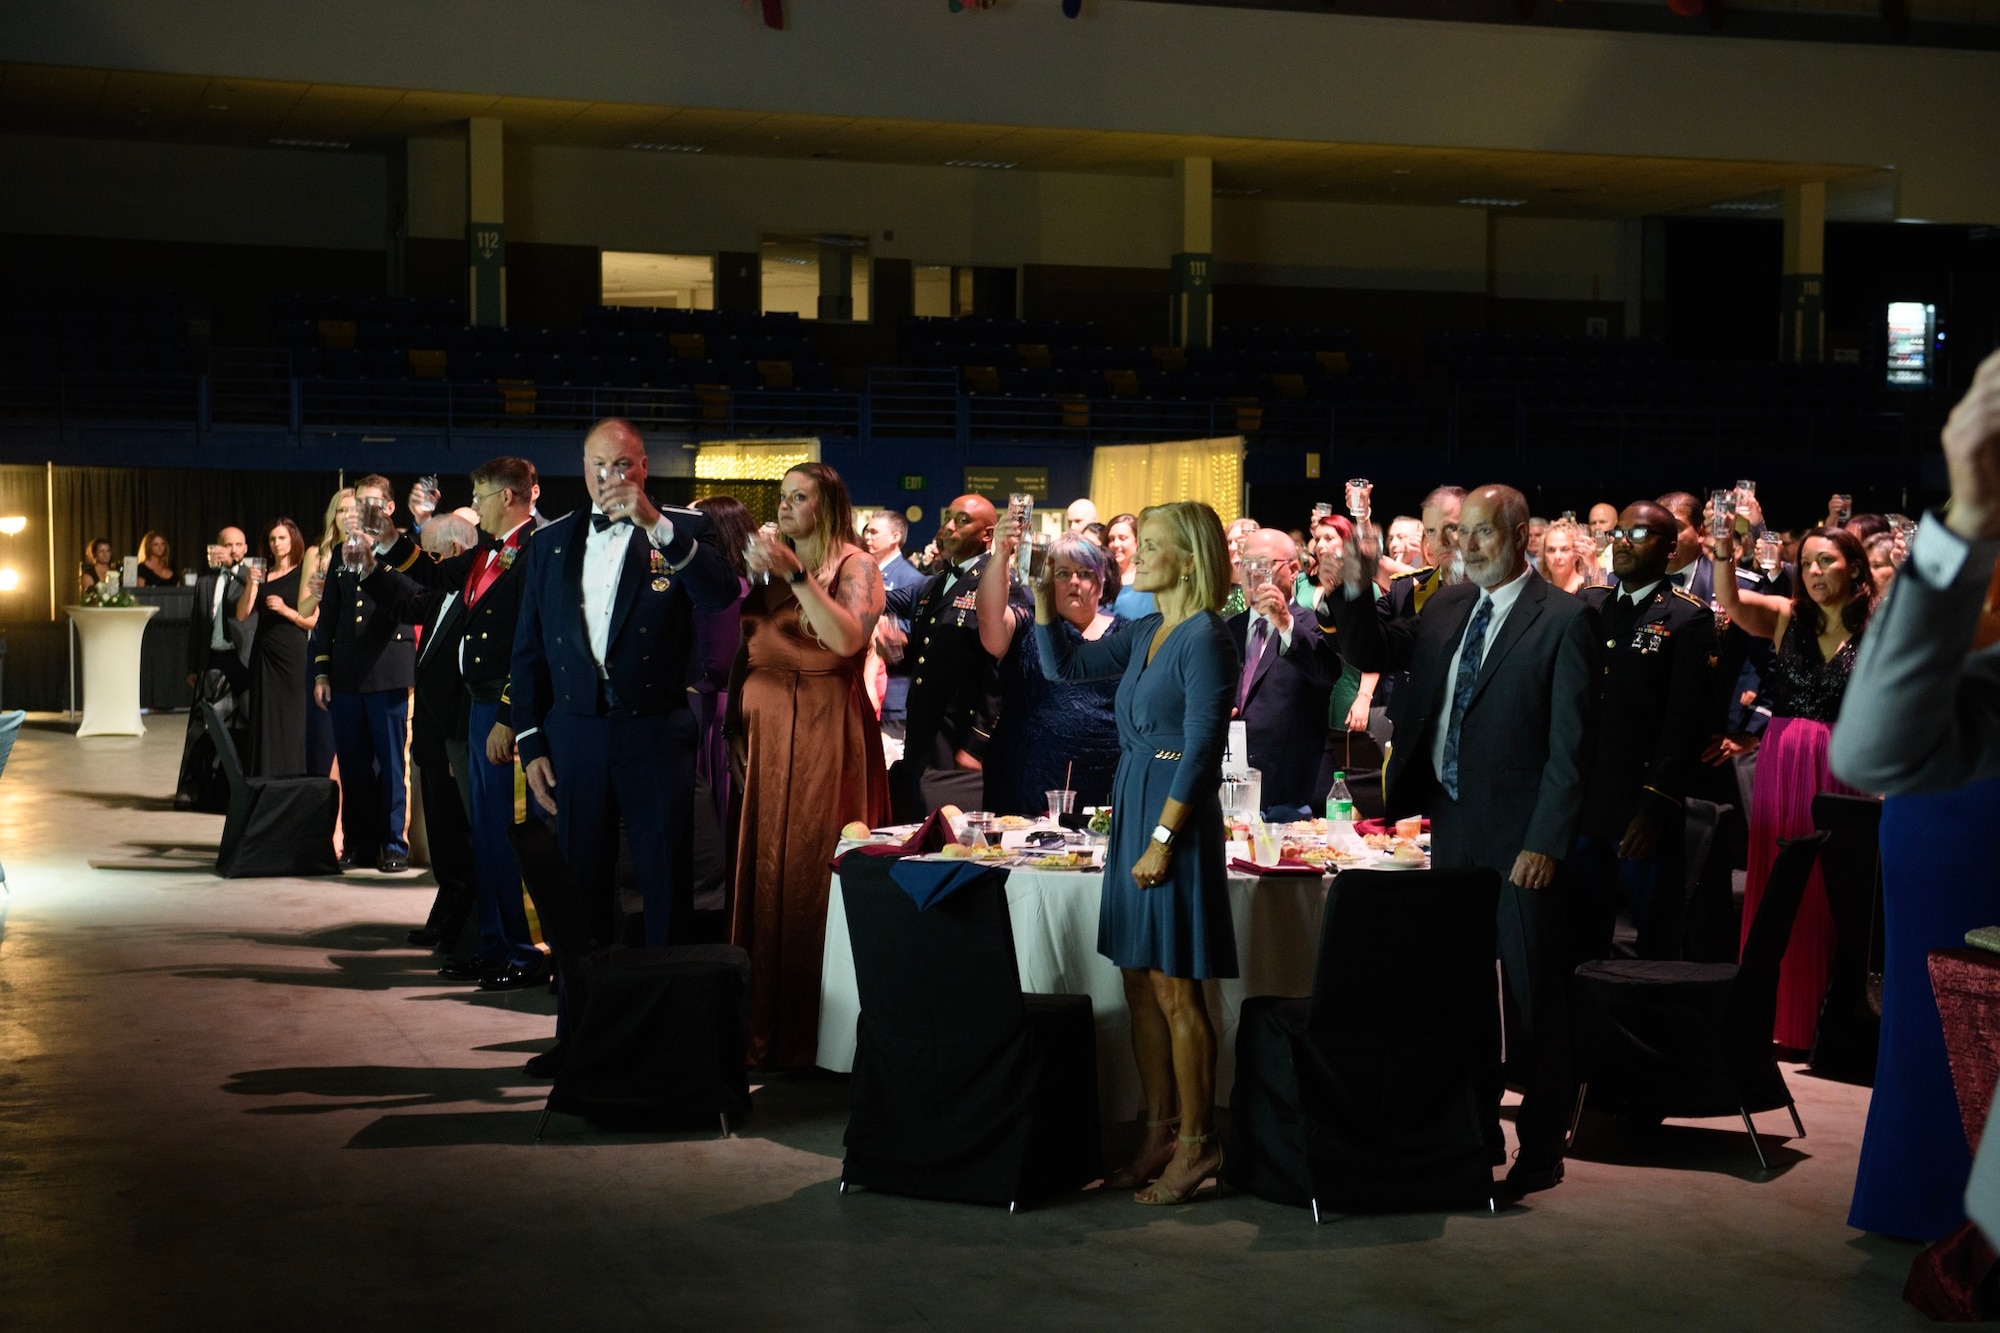 Fairbanks community and military members raise a glass in honor of military members missing in action as a part of the prisoners of war and MIA ceremony at the Fairbanks Chamber of Commerce Military Appreciation Banquet.